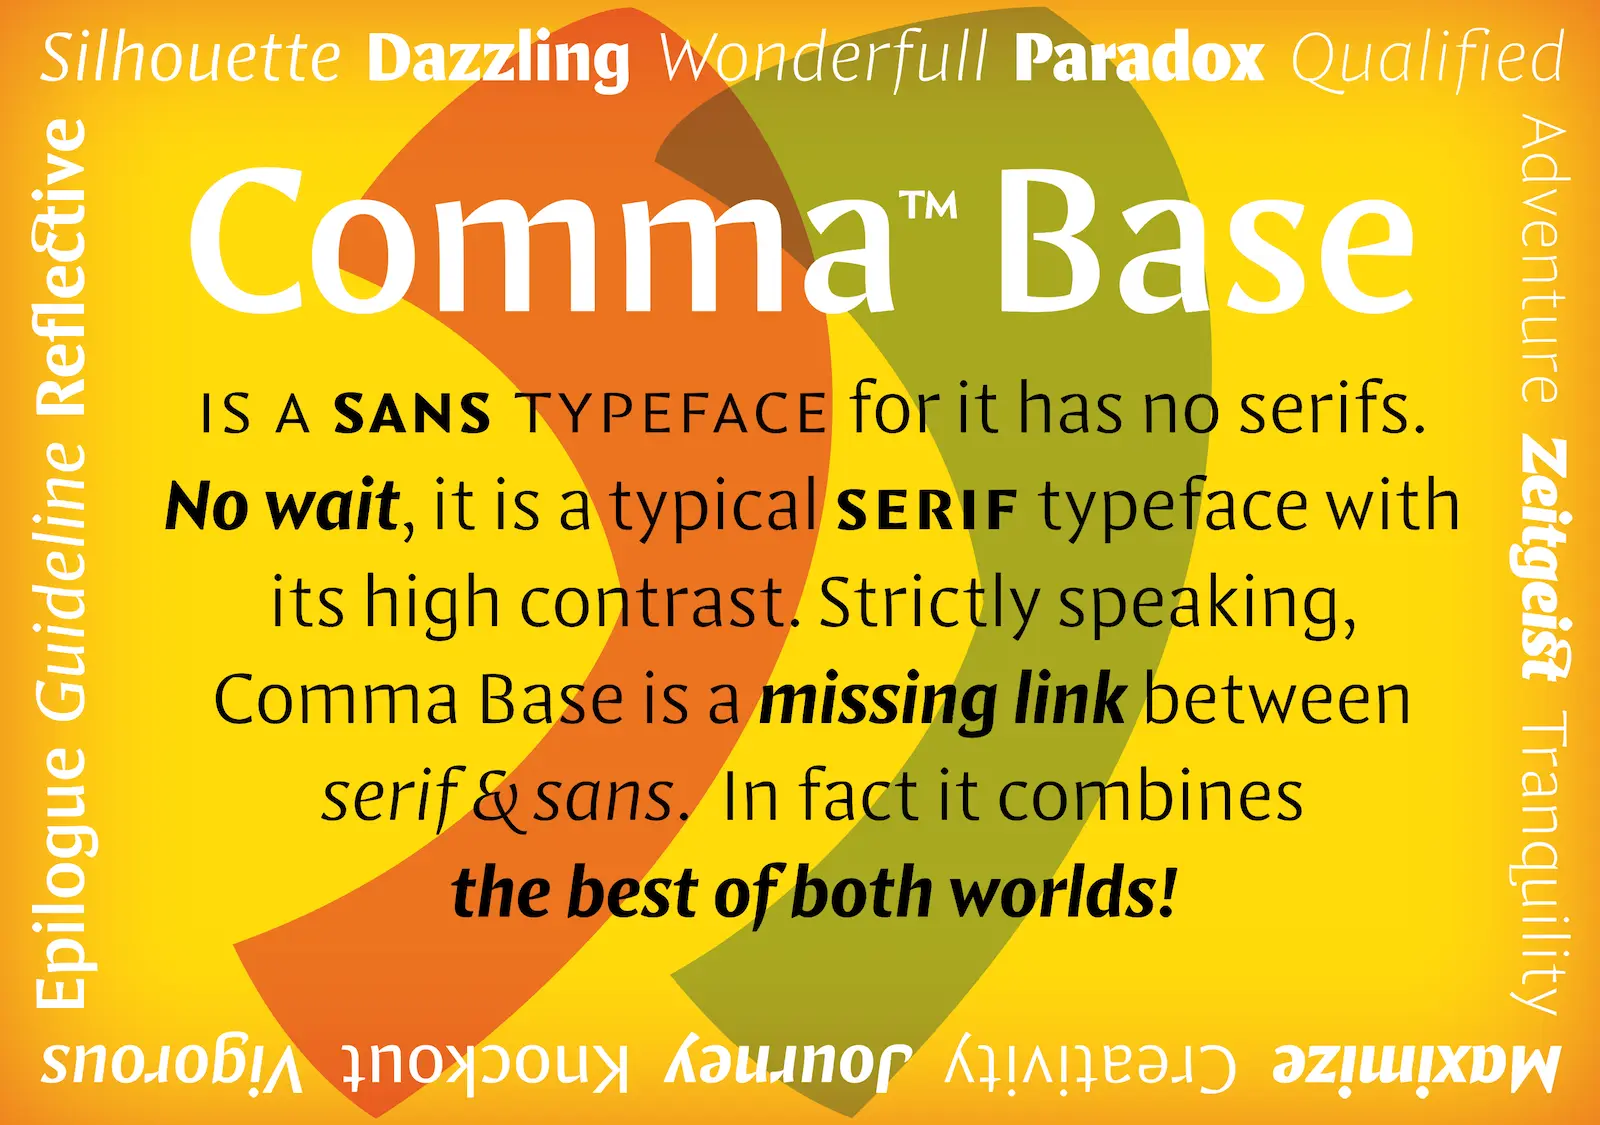 Example of a typeface from designer Martin Majoor.